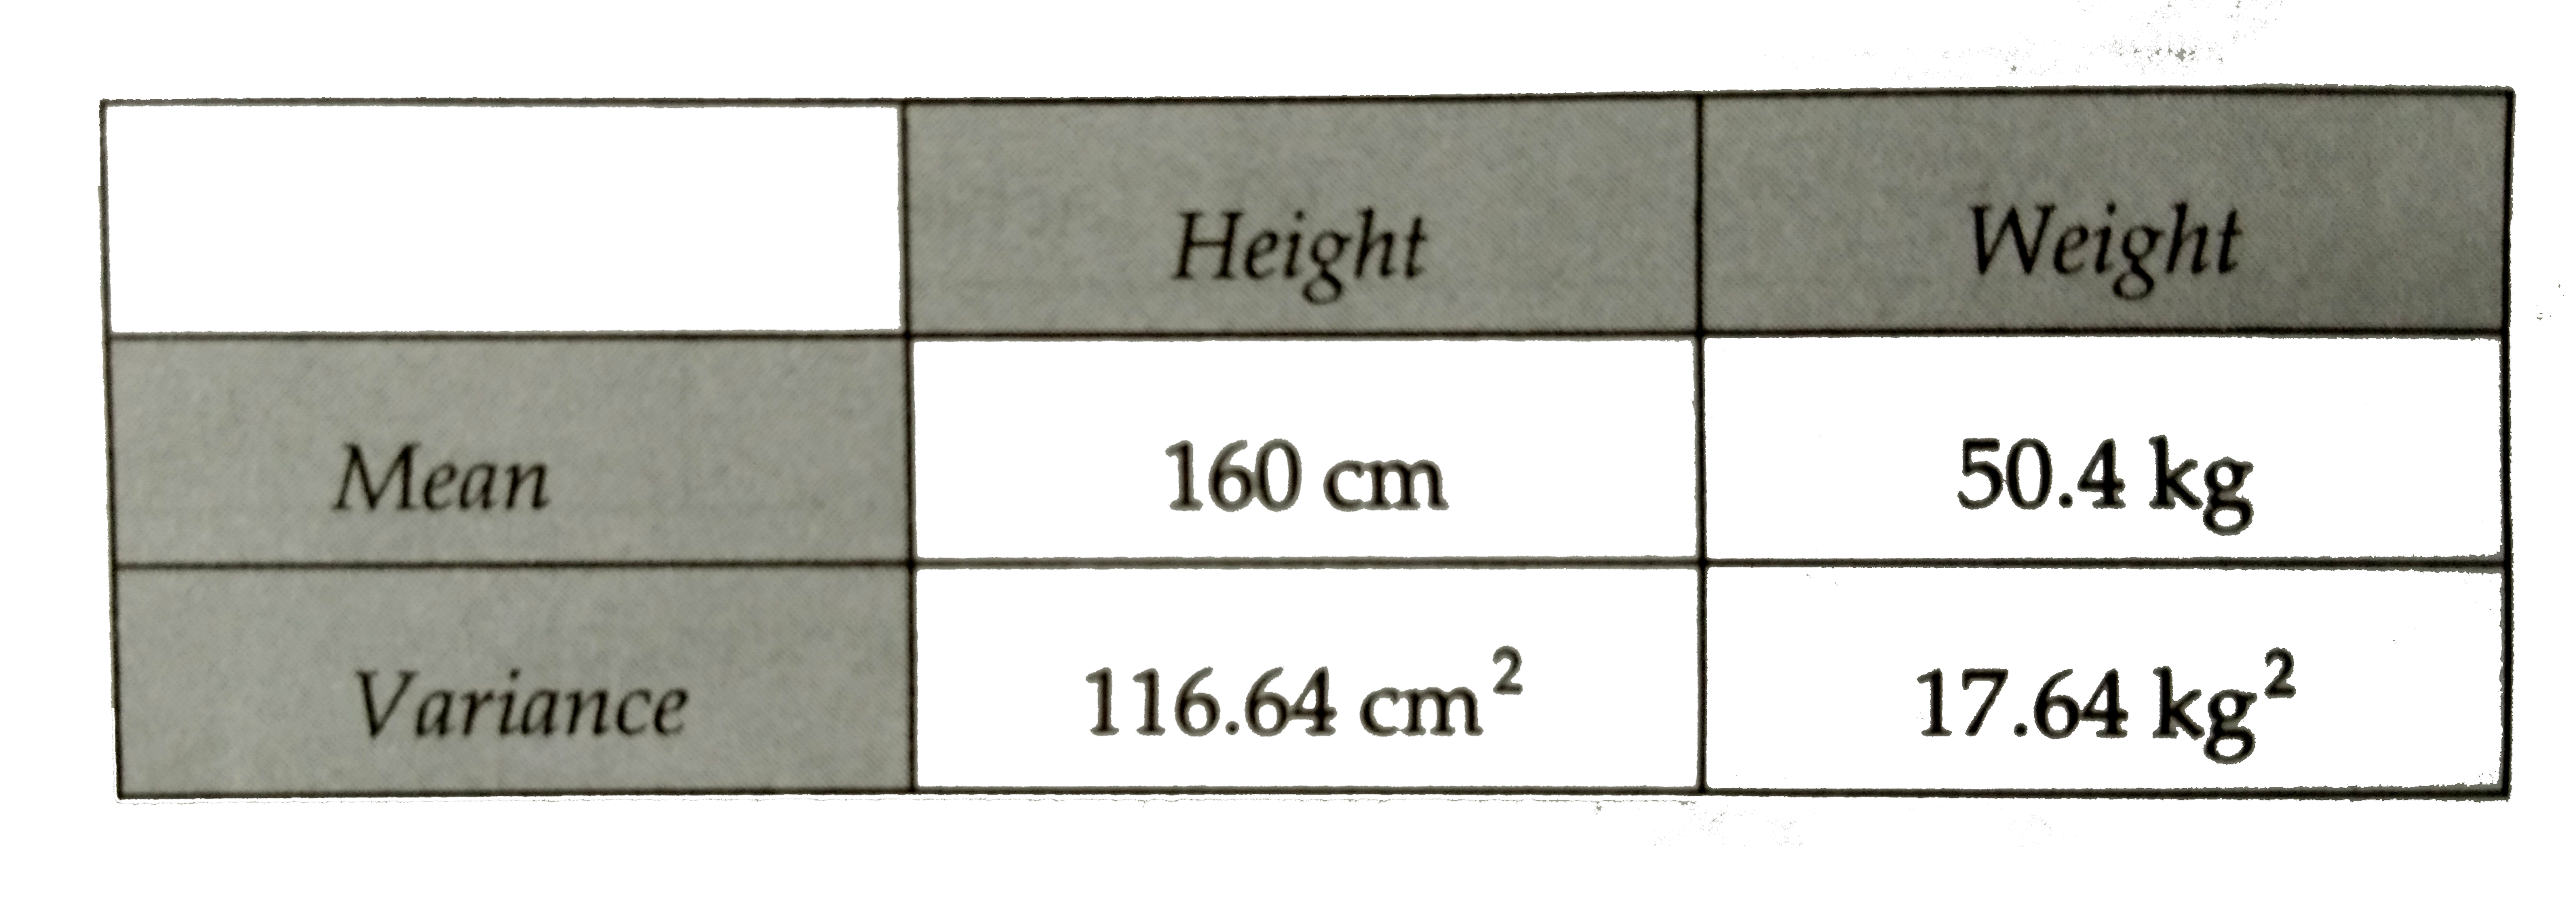 The mean and variance of the heights and weights of the students of a class are given below.       Show that the wieghts are more variable than heights.